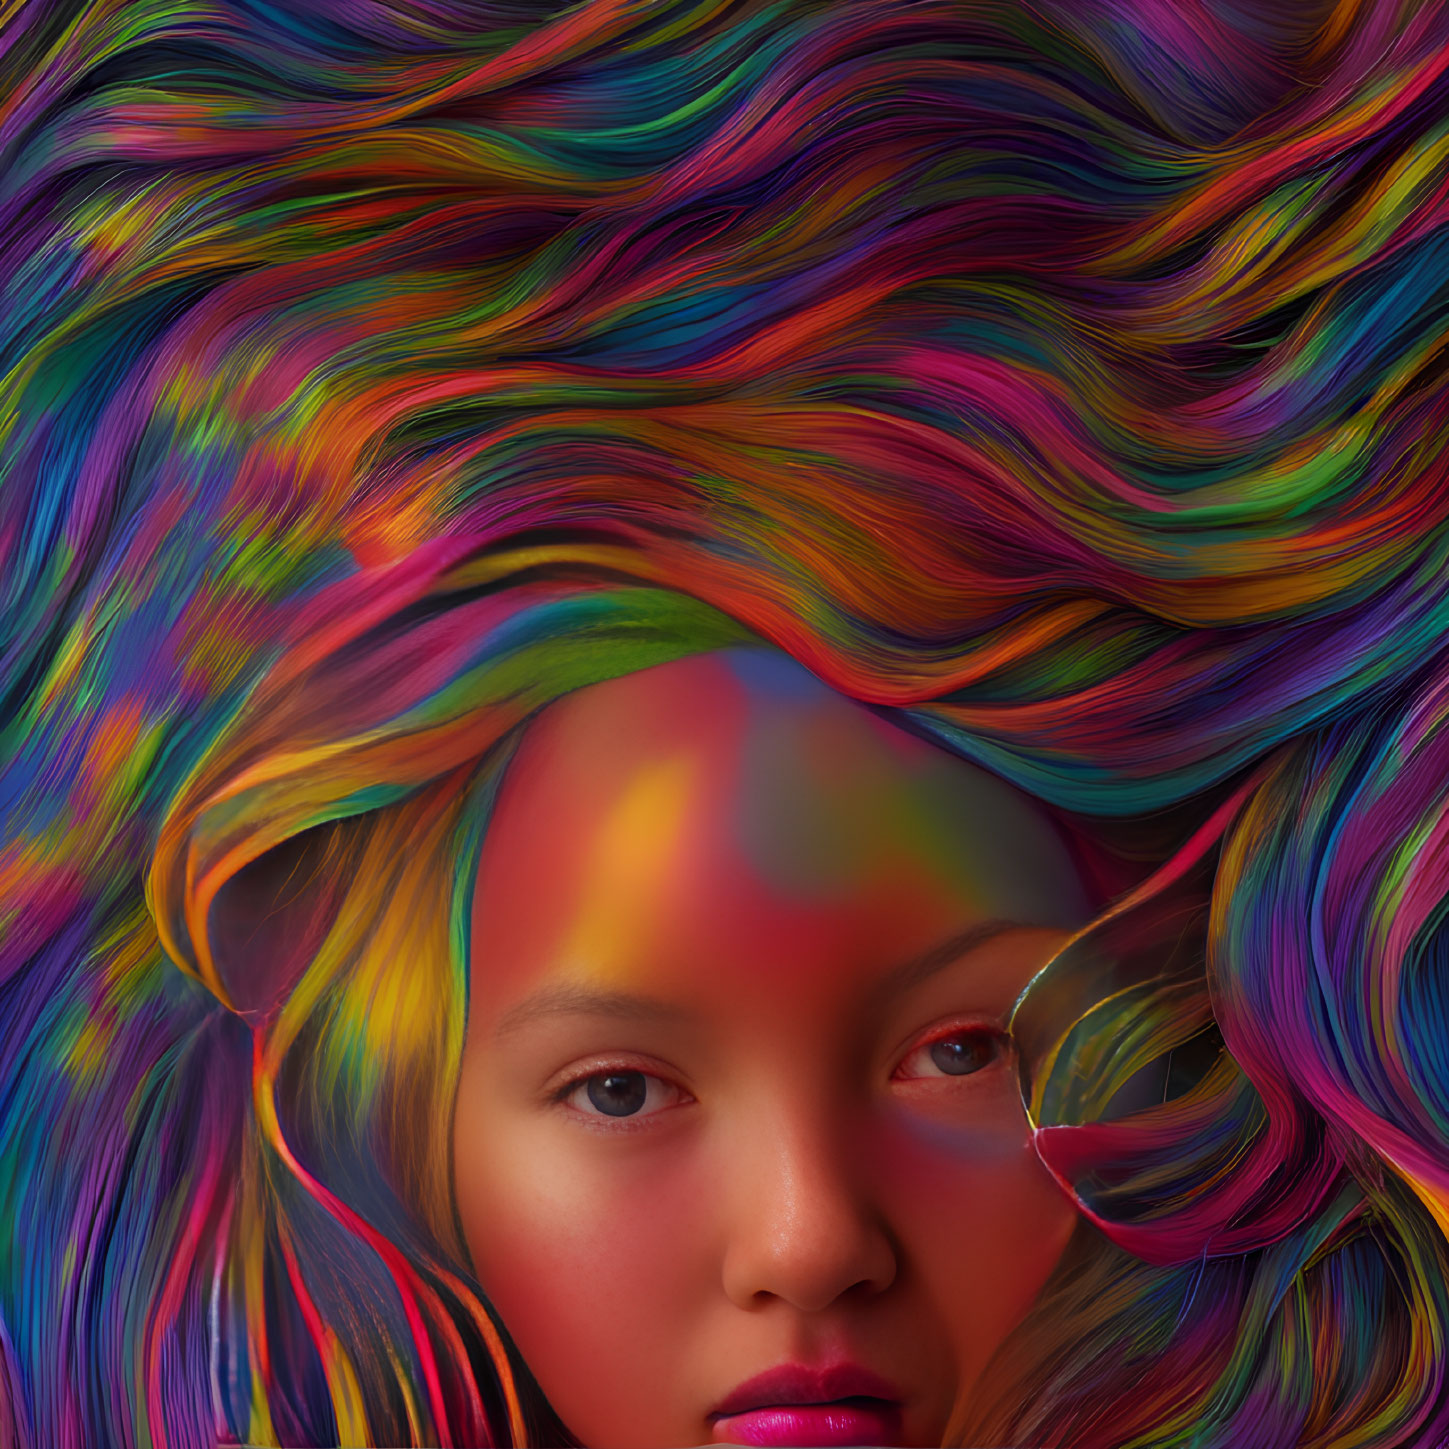 Colorful flowing hair resembling vibrant paint swirls on a person's face with a contemplative expression